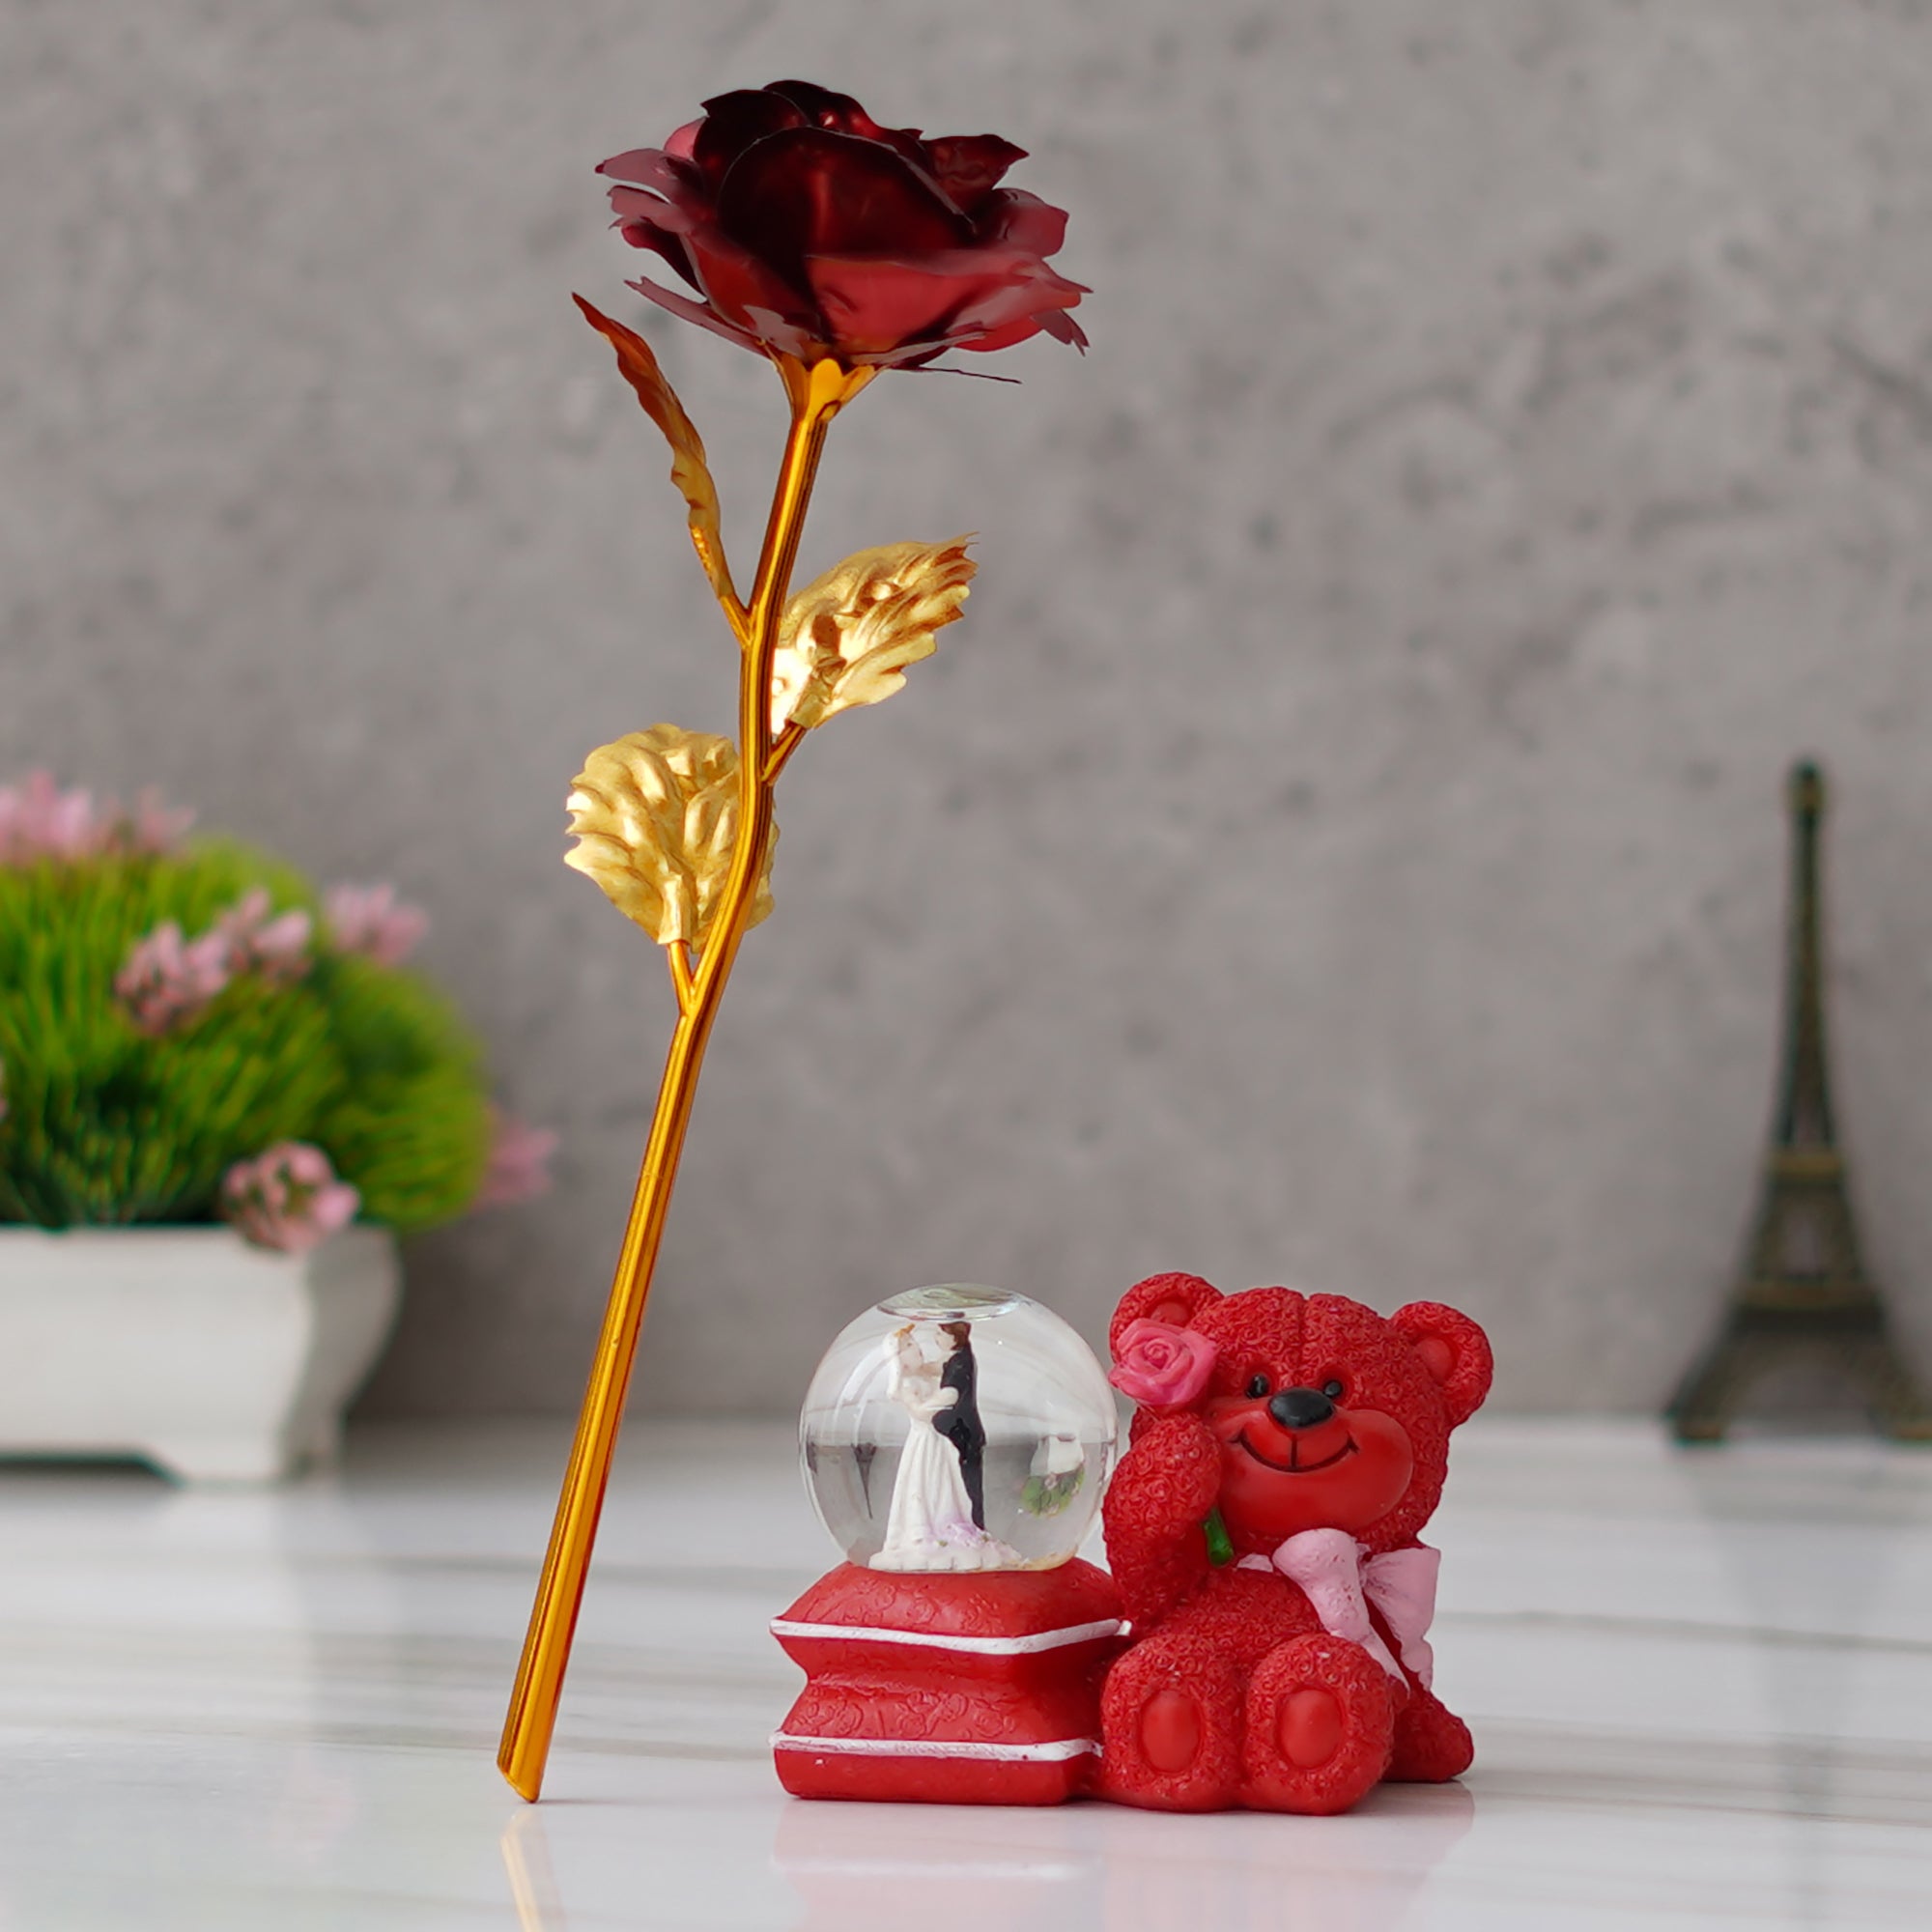 Valentine Combo of Golden Red Rose Gift Set, Red Teddy Bear, Couple Snow Globe with Light